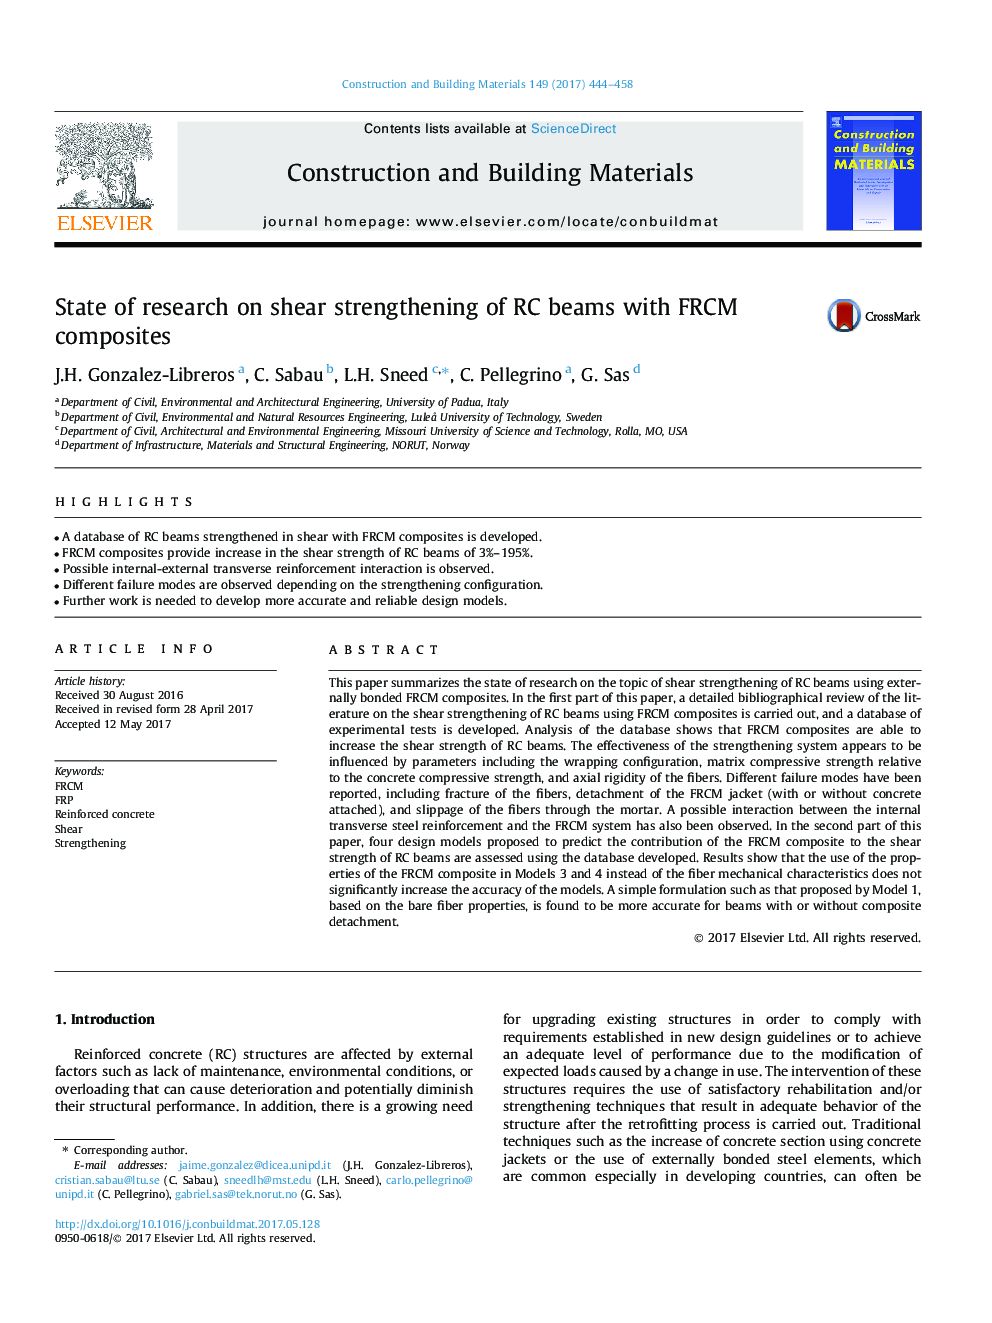 State of research on shear strengthening of RC beams with FRCM composites